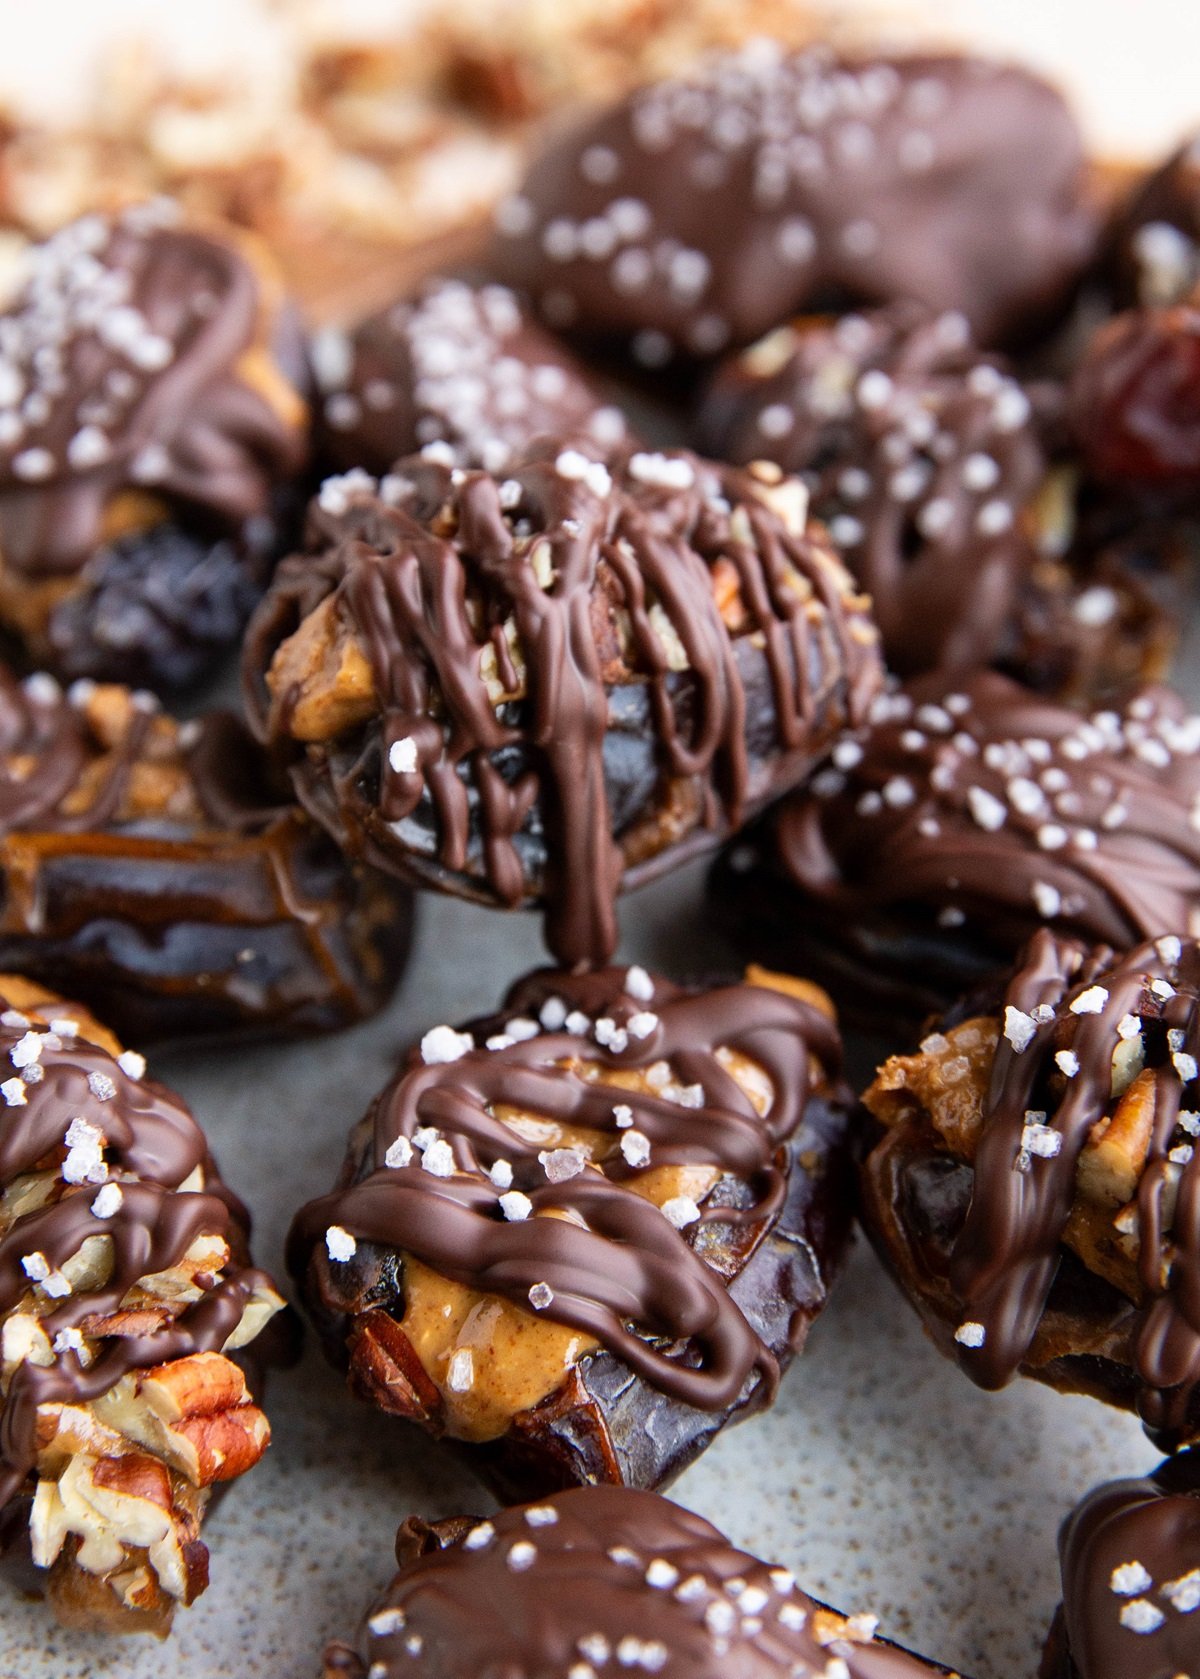 Plate of stuffed dates drizzled with chocolate, ready to eat.